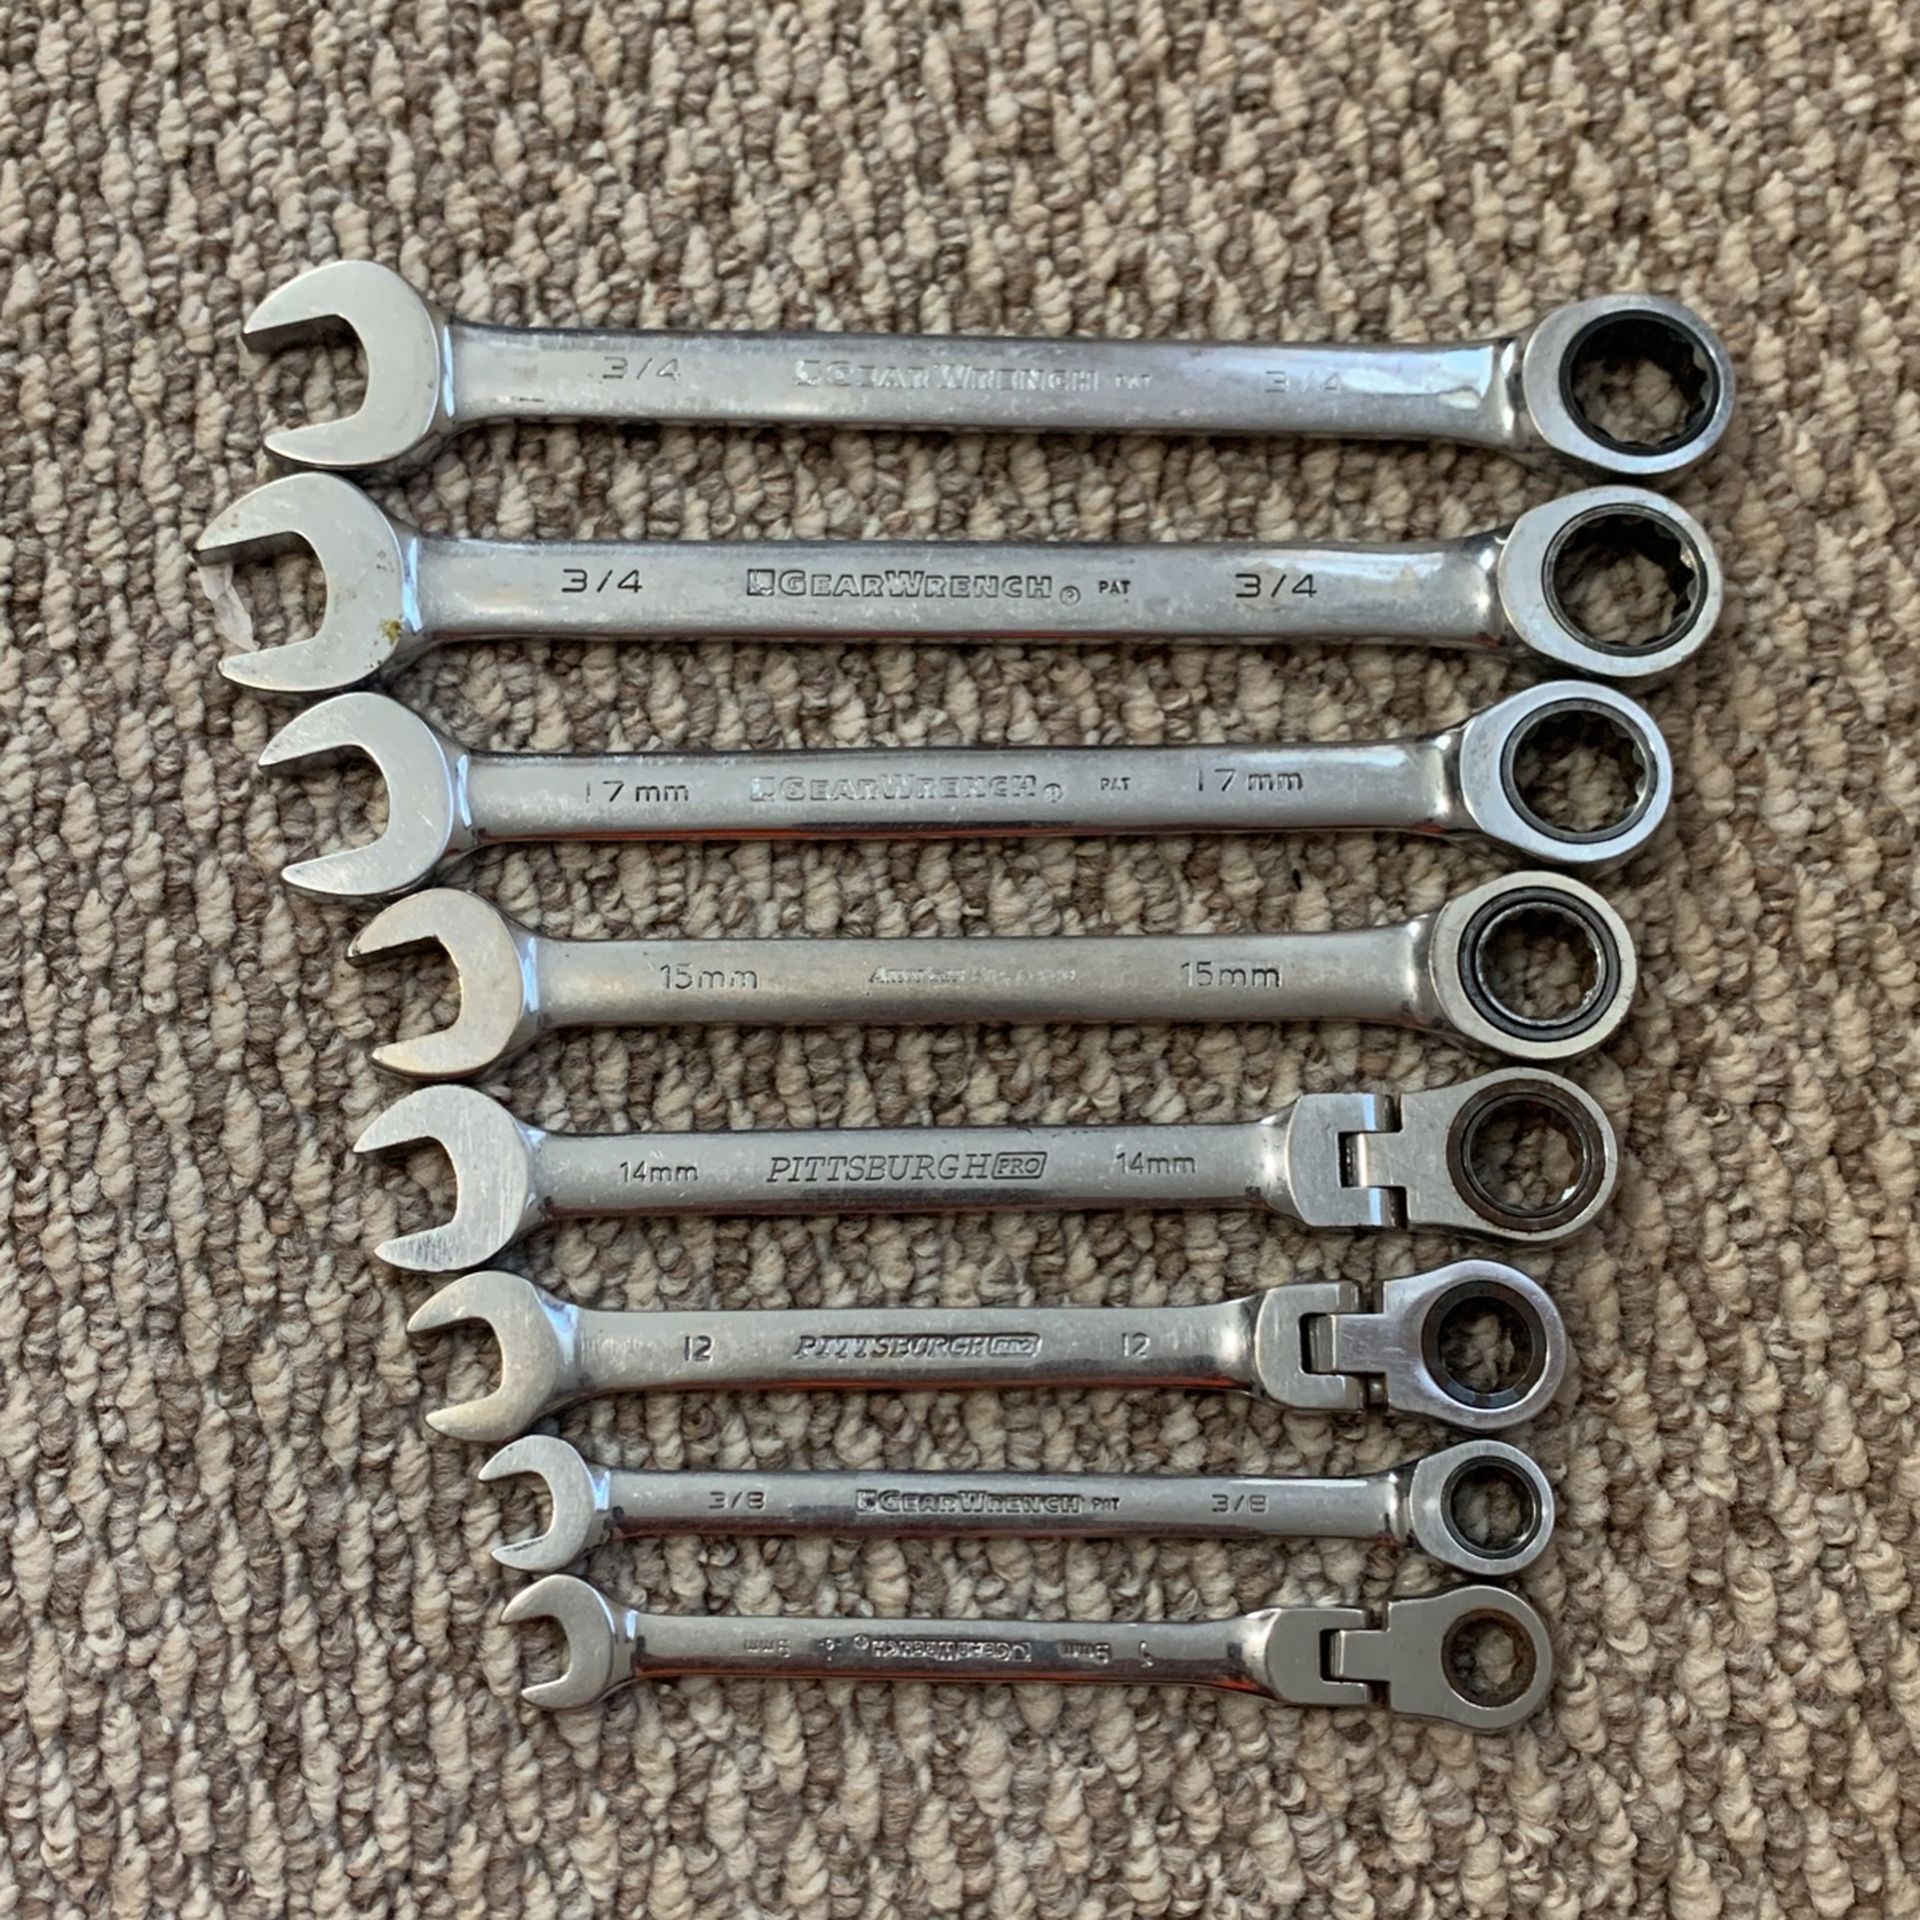 Assorted Random Ratchet Wrenches